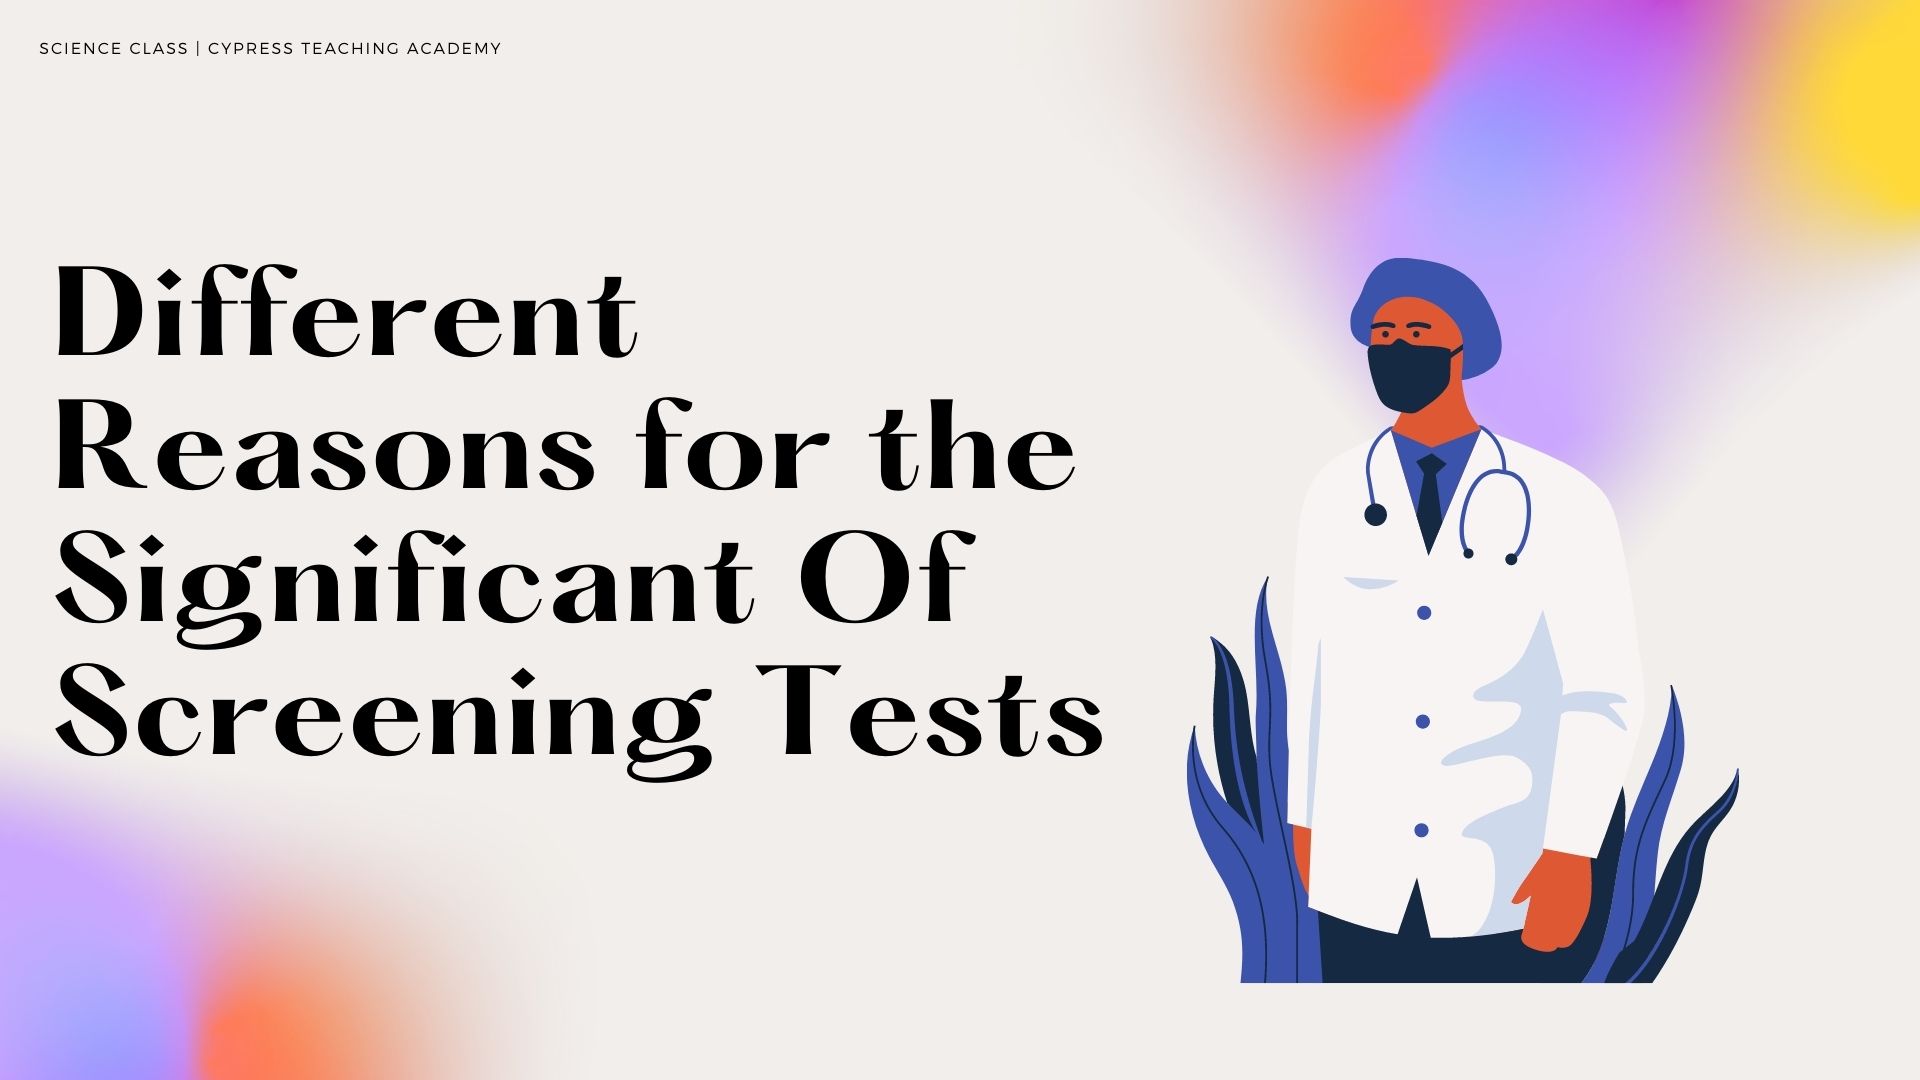 Different Reasons for the Significant Of Screening Tests